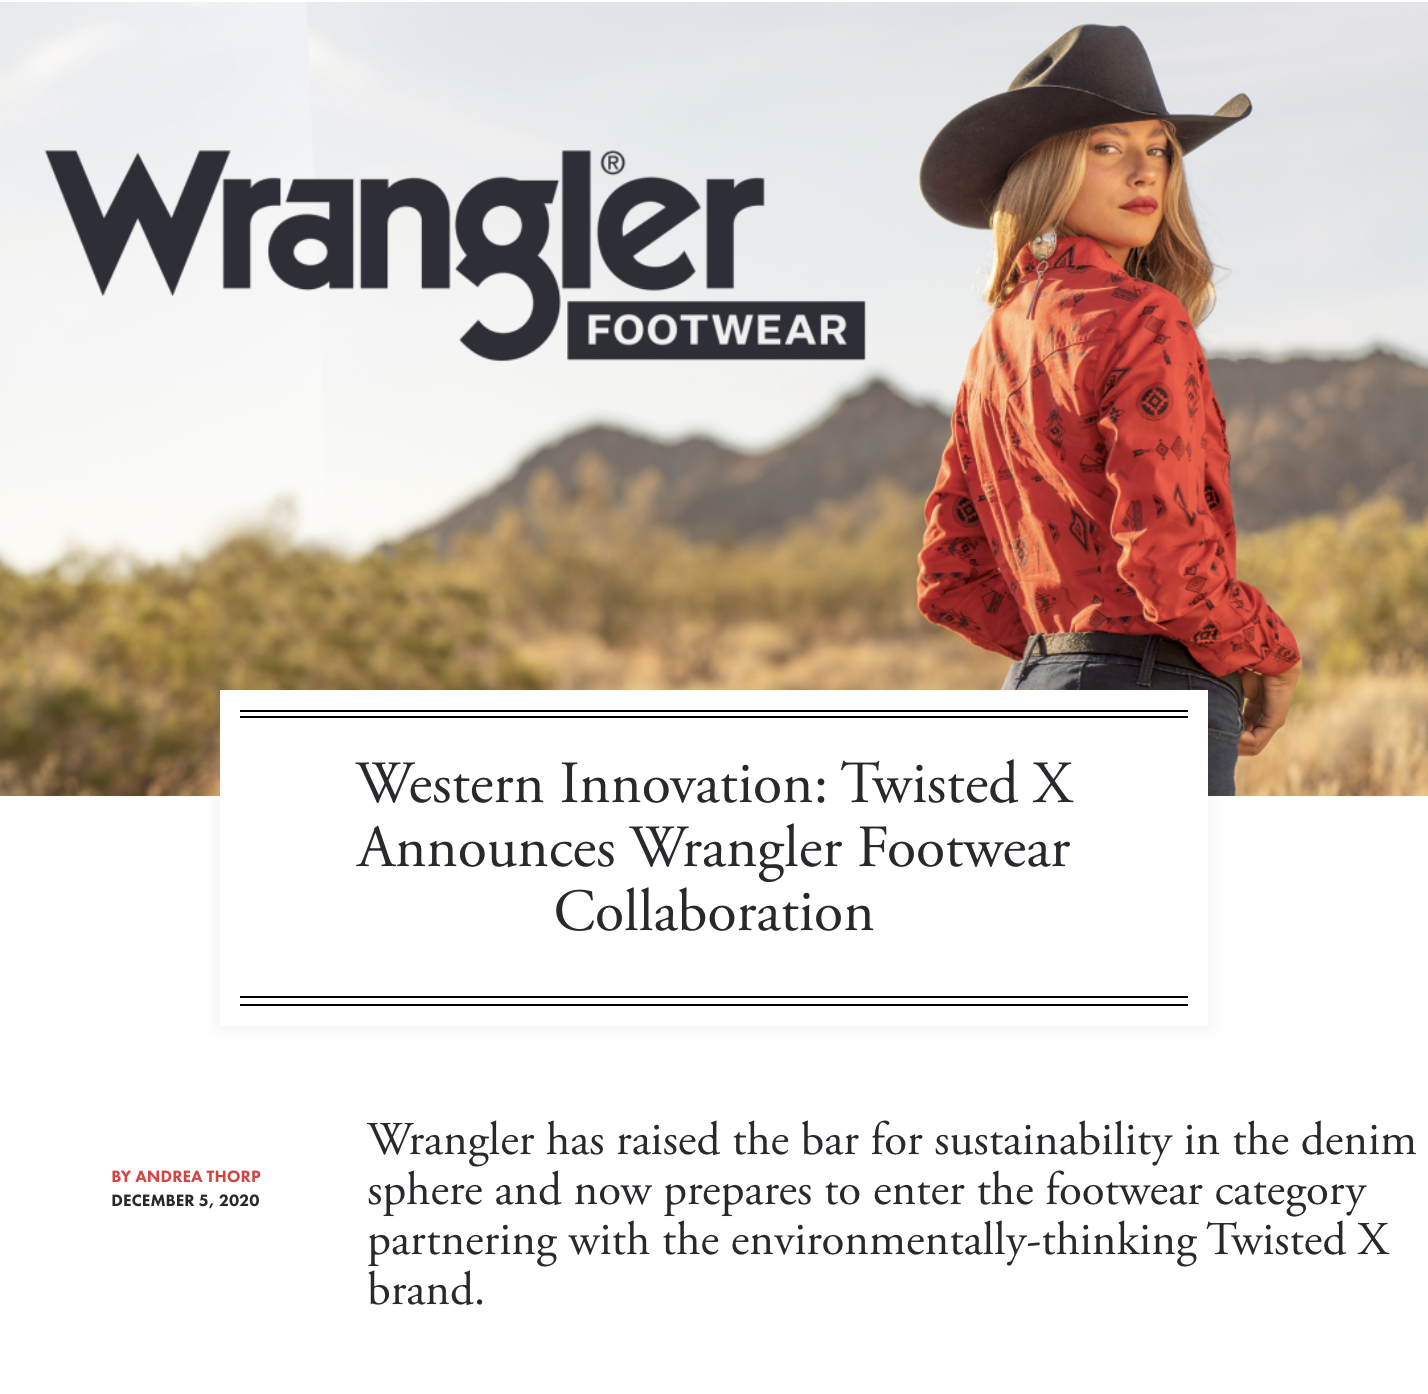 Western Innovation: Twisted X Announces Wrangler Footwear Collaboration